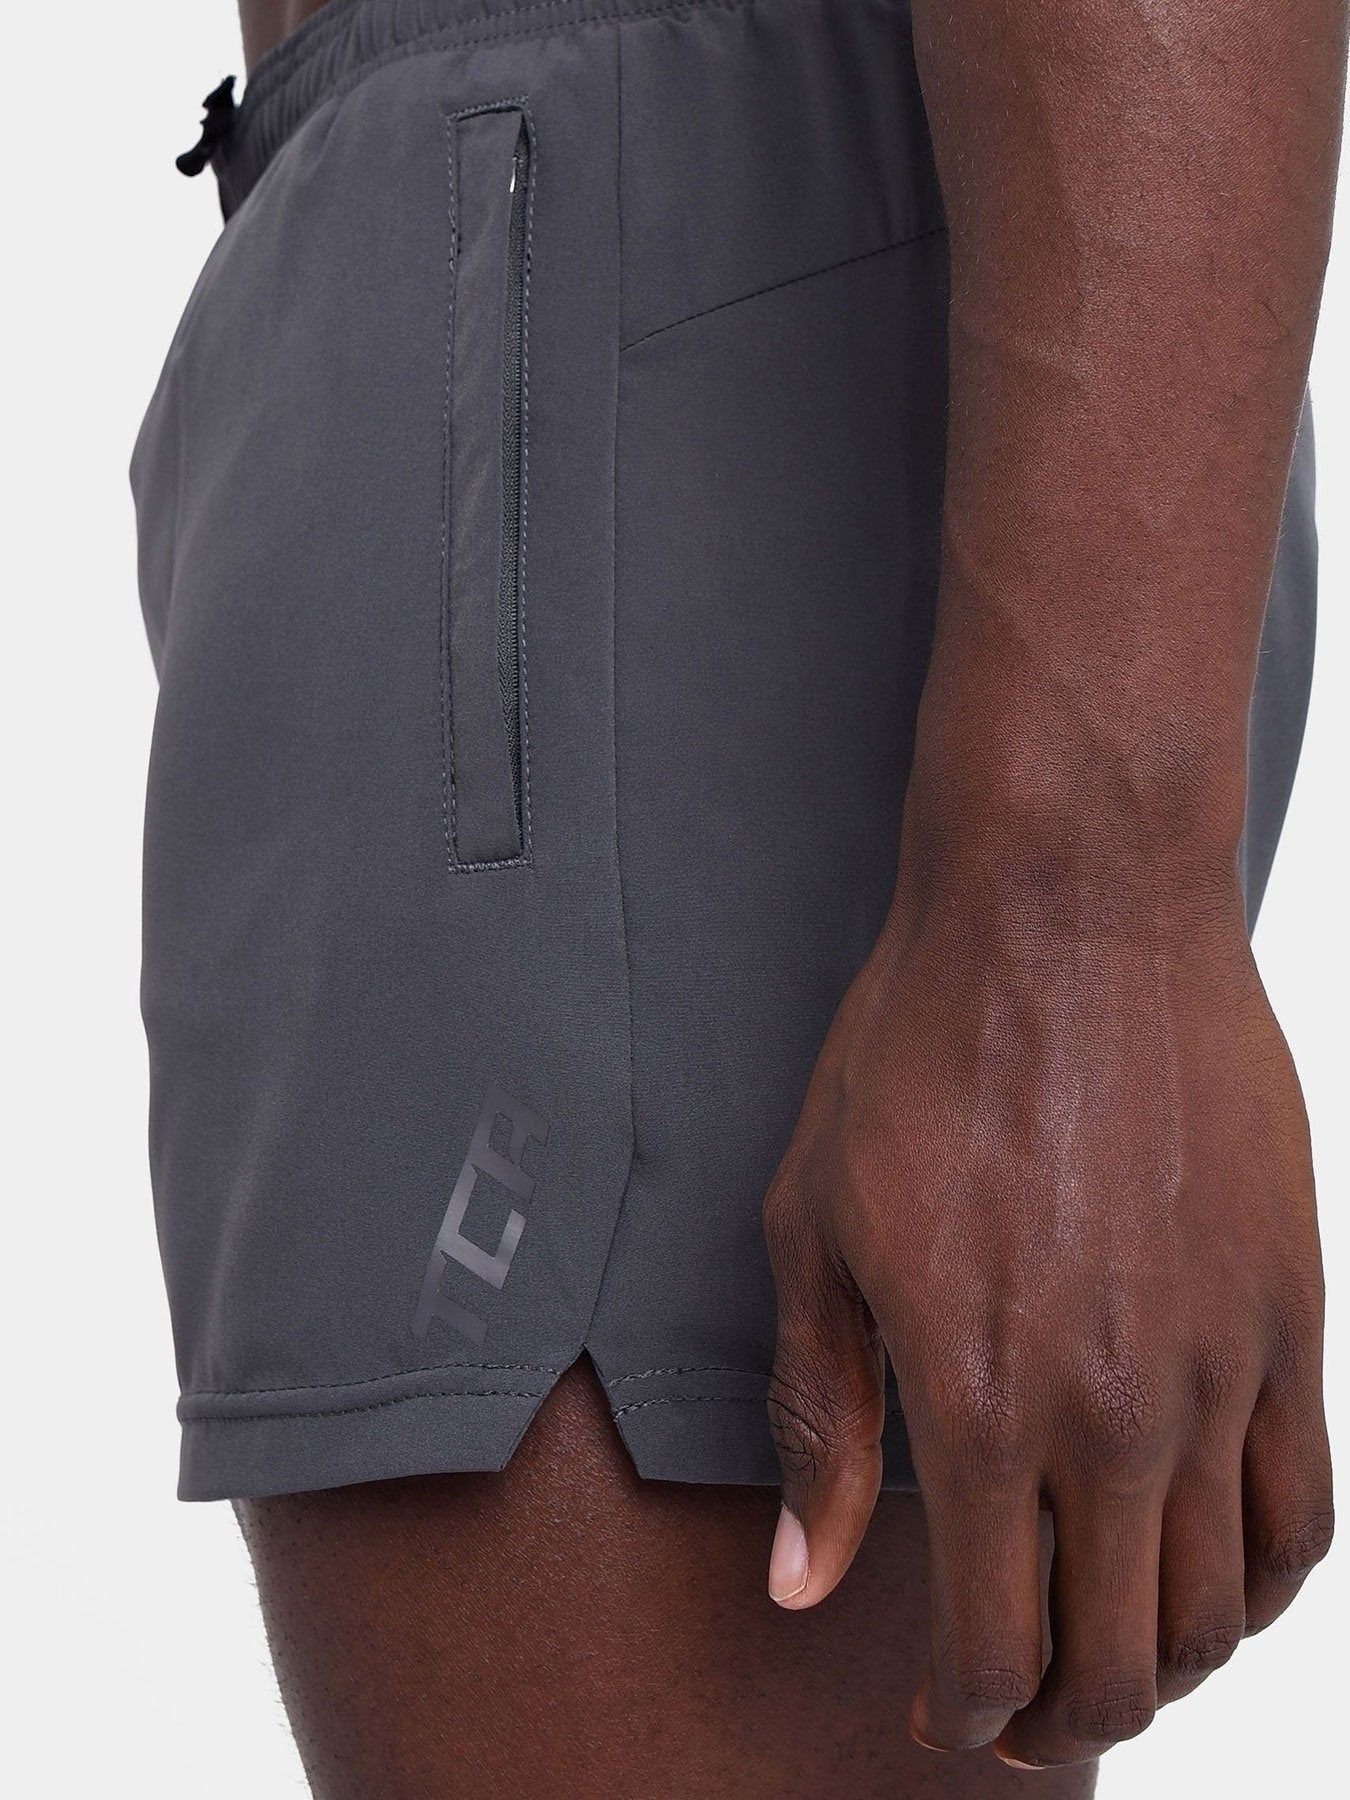 Pace Running Short for Men with Side Zip Pockets & Internal Netting